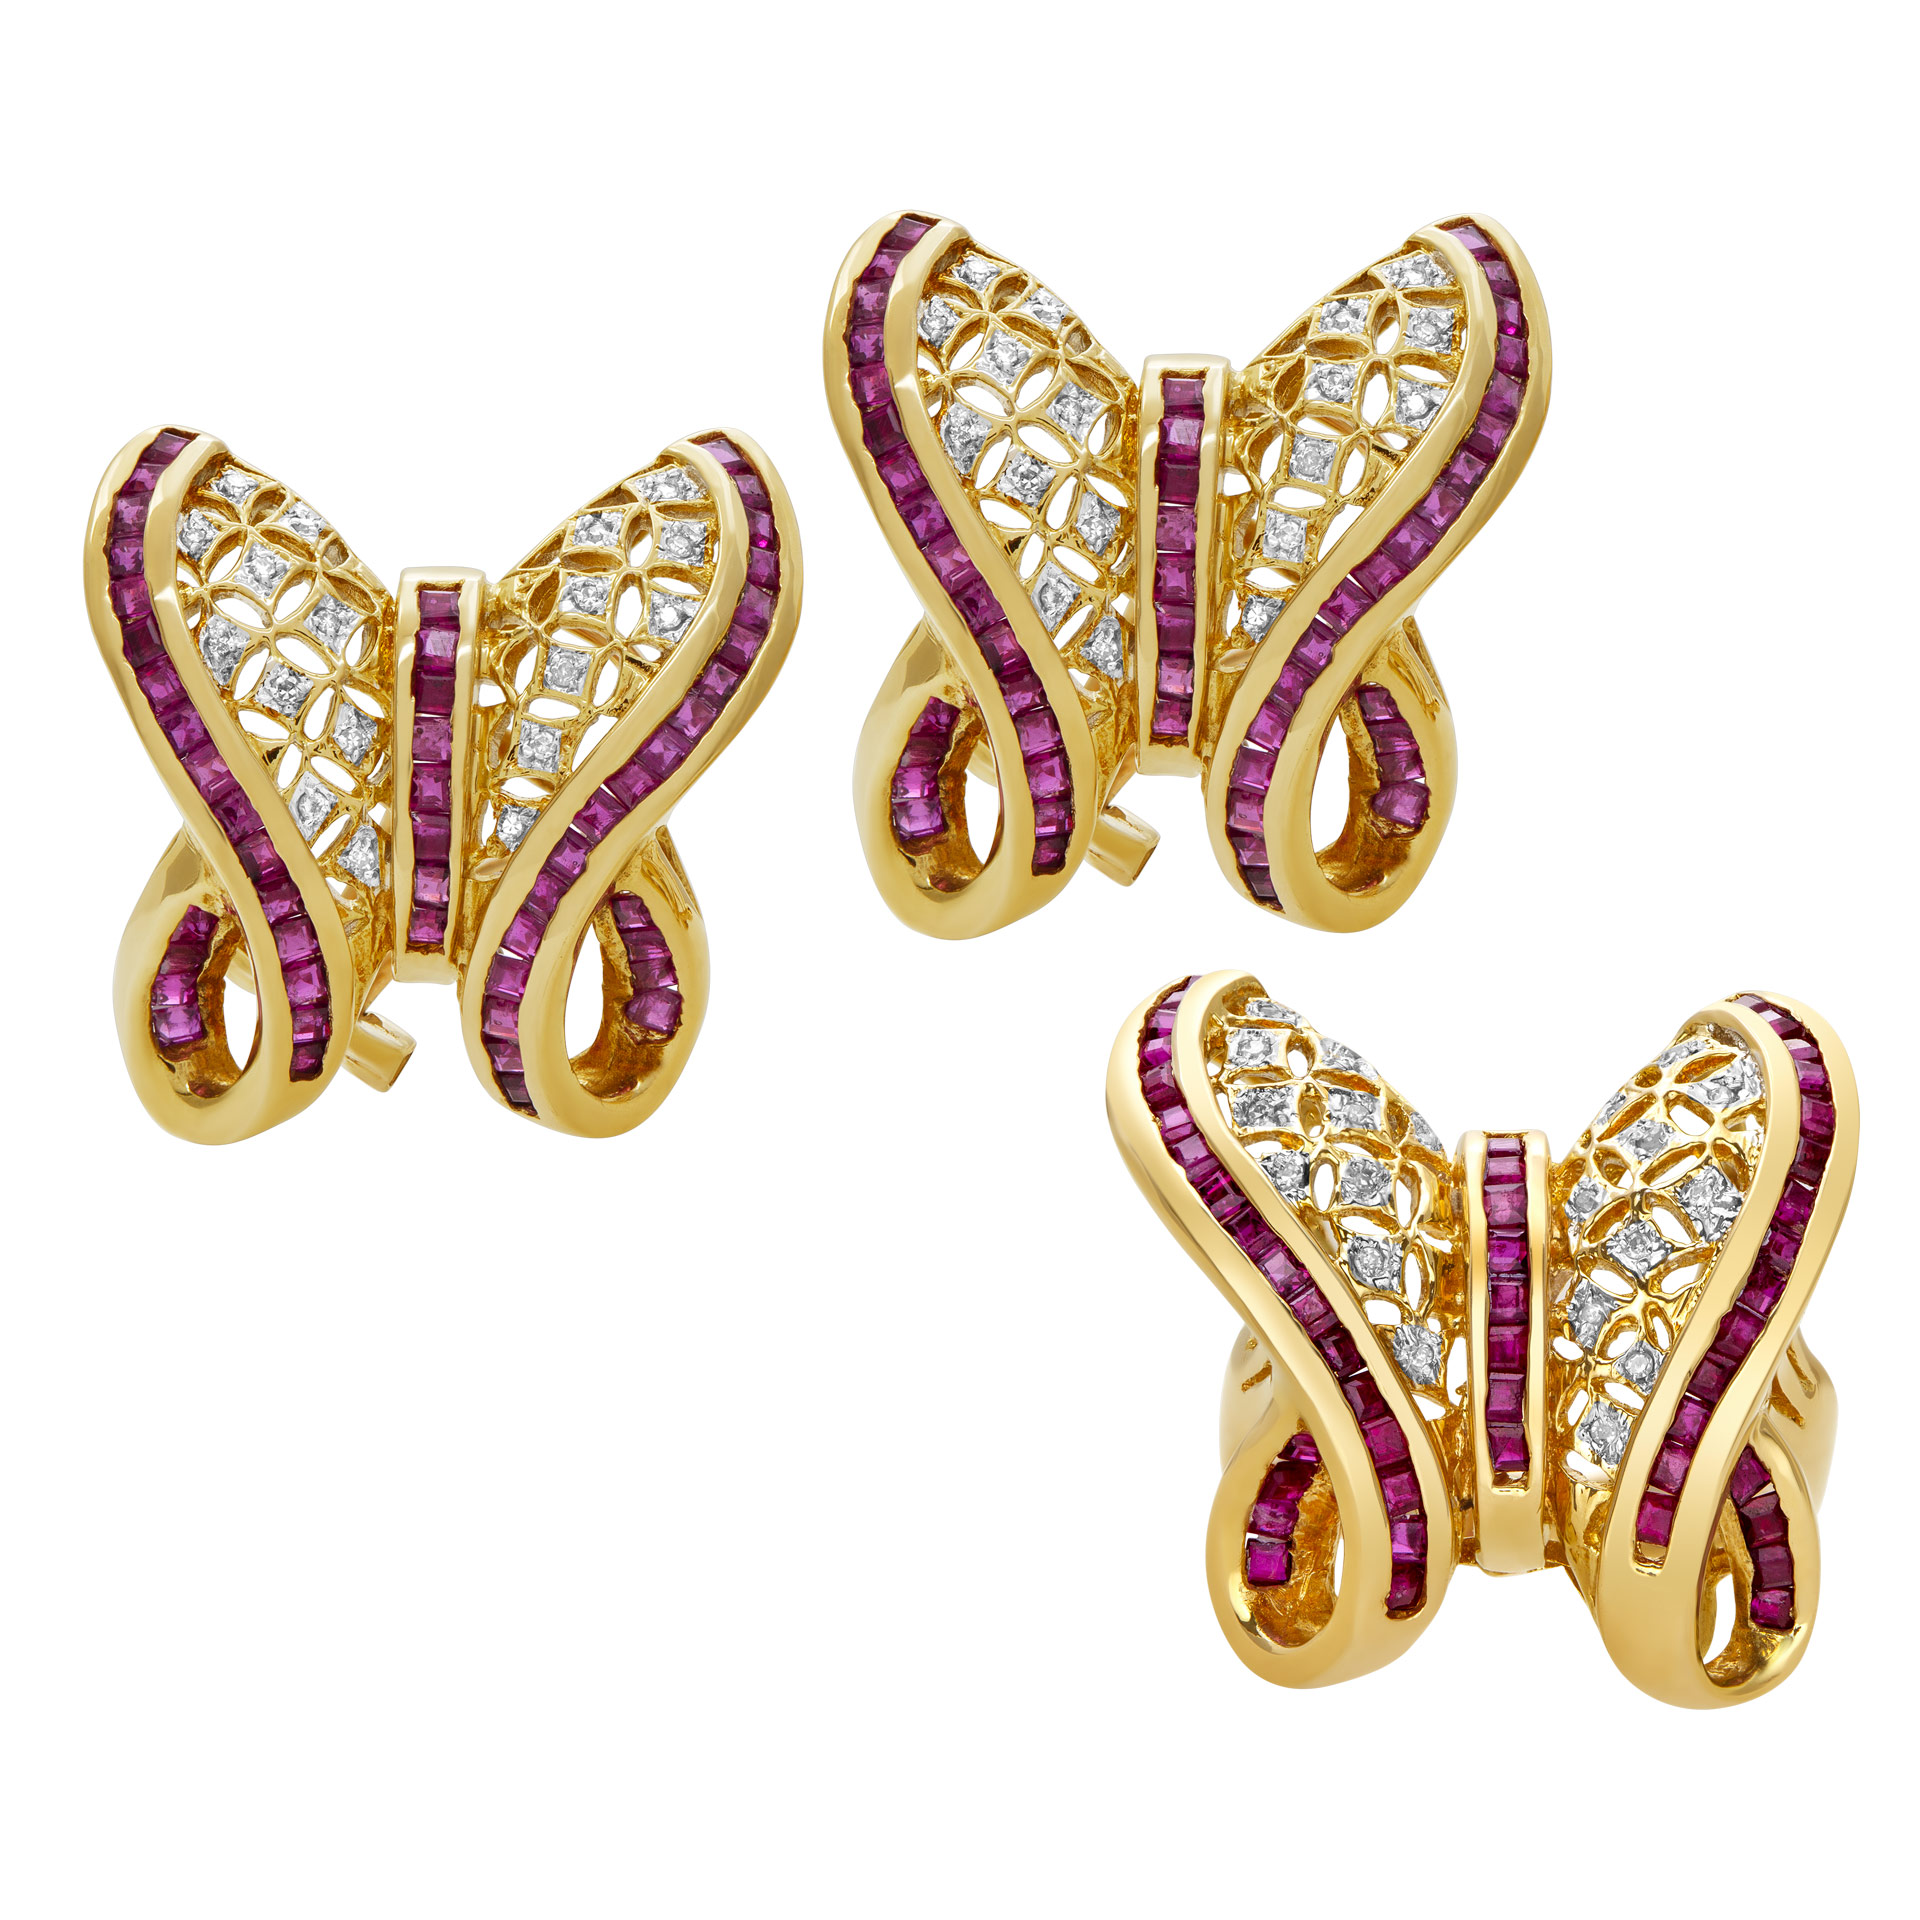 Butterfly Diamond and ruby Earring and Ring Set 14k yellow gold. image 1